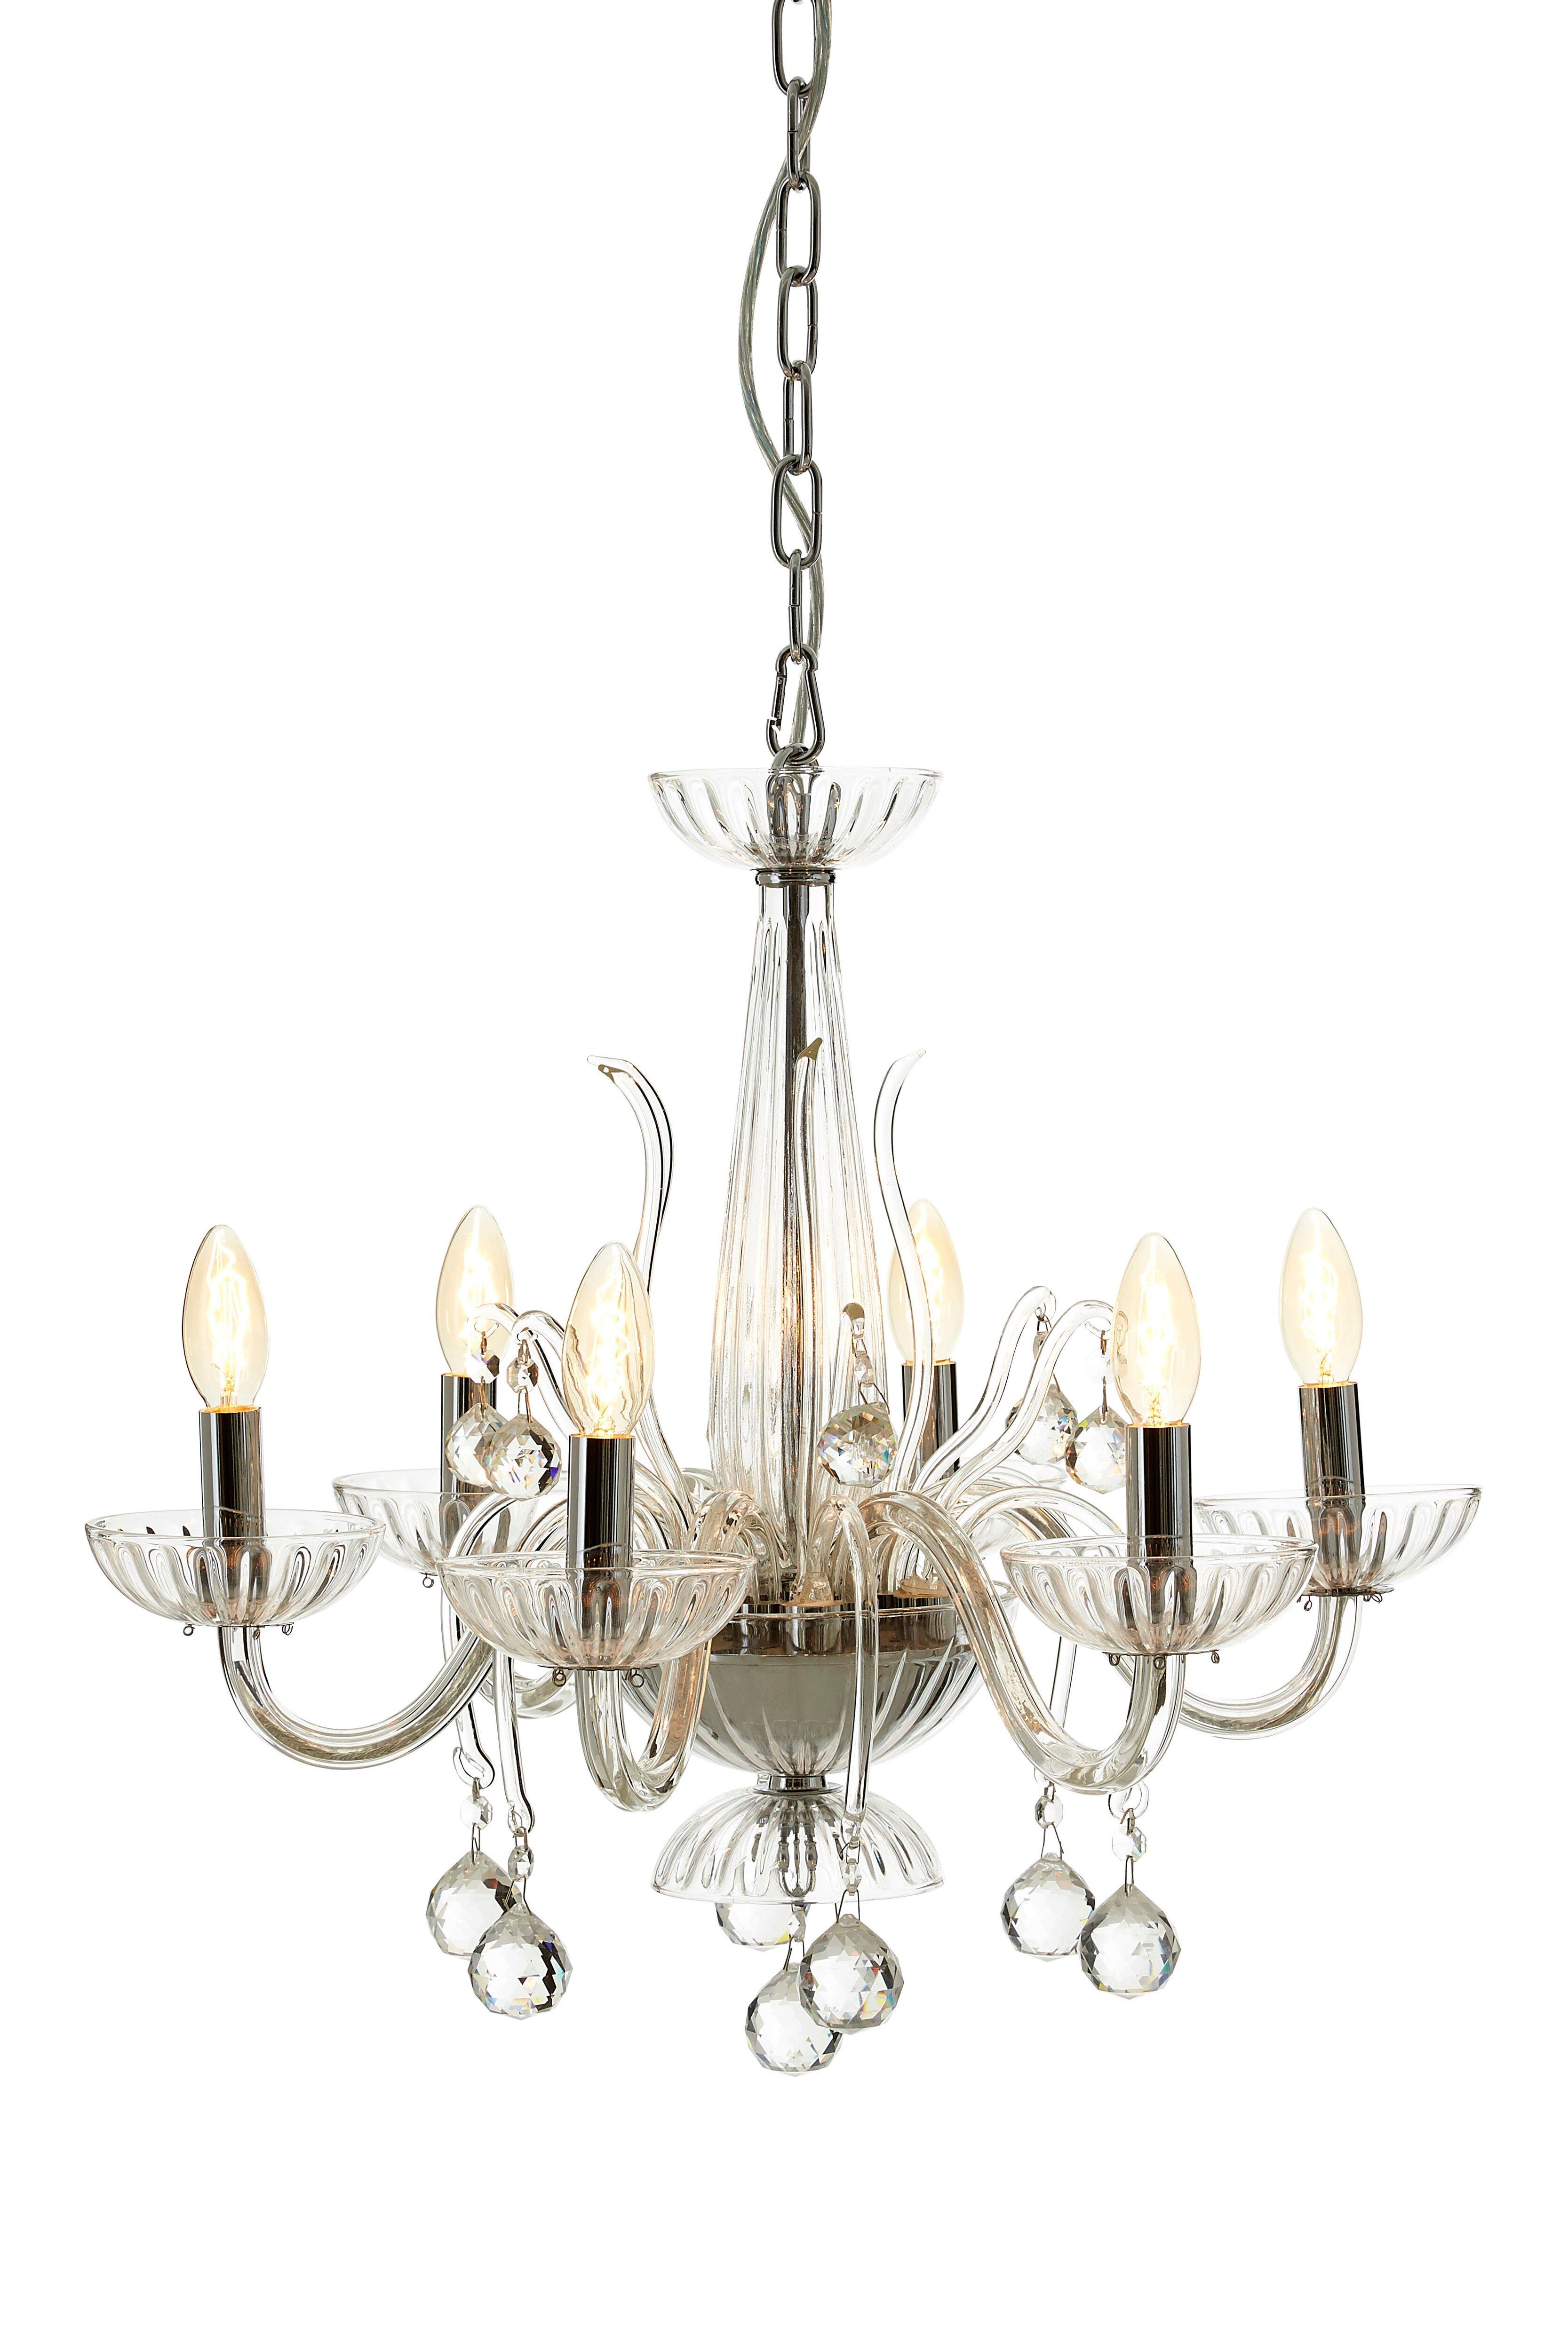 Interiors by Premier Murano 6 Bulb Clear Crystal Chandelier